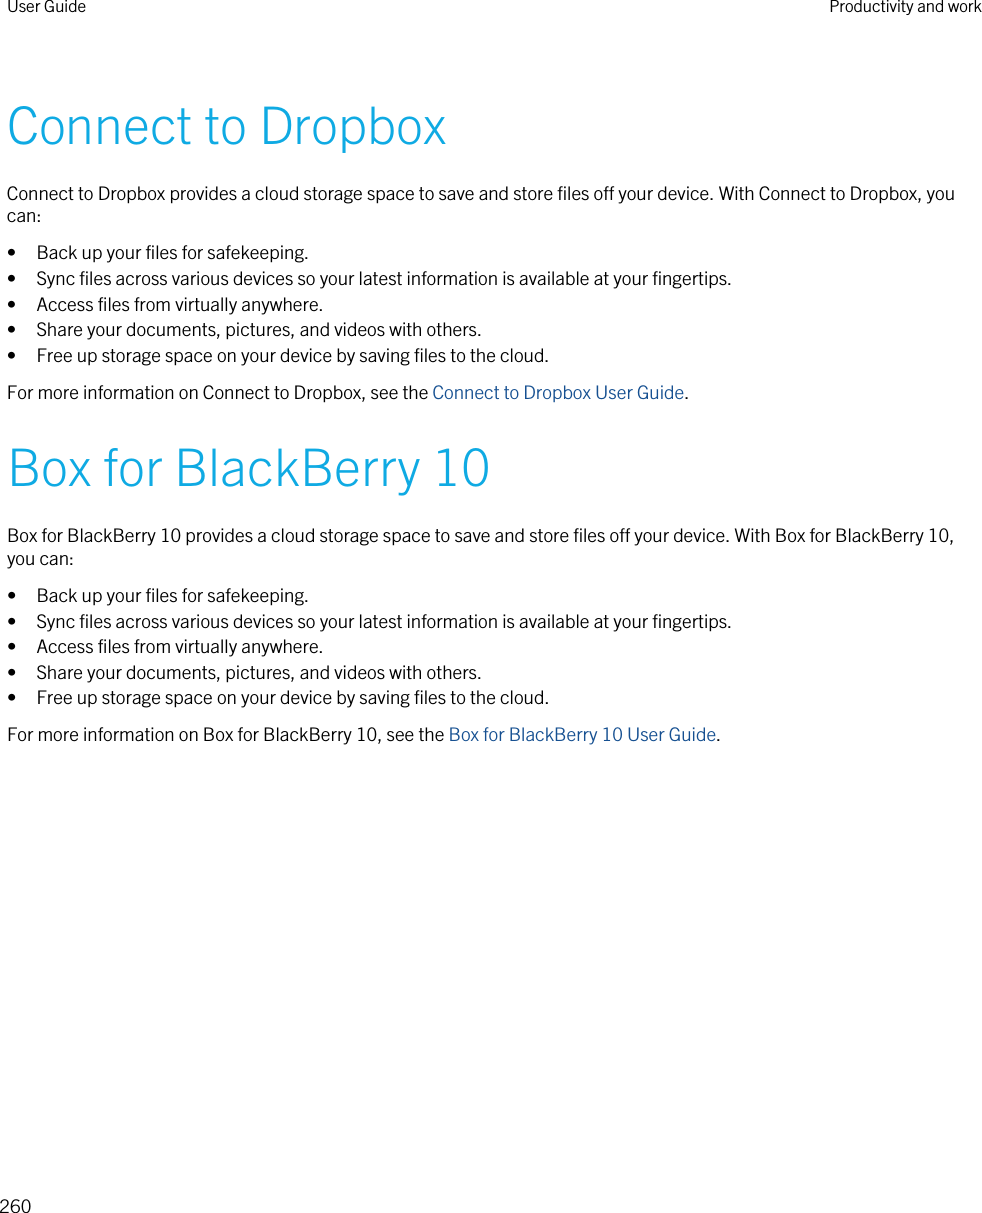 Connect to DropboxConnect to Dropbox provides a cloud storage space to save and store files off your device. With Connect to Dropbox, you can:• Back up your files for safekeeping.• Sync files across various devices so your latest information is available at your fingertips.• Access files from virtually anywhere.• Share your documents, pictures, and videos with others.• Free up storage space on your device by saving files to the cloud.For more information on Connect to Dropbox, see the Connect to Dropbox User Guide.Box for BlackBerry 10Box for BlackBerry 10 provides a cloud storage space to save and store files off your device. With Box for BlackBerry 10, you can:• Back up your files for safekeeping.• Sync files across various devices so your latest information is available at your fingertips.• Access files from virtually anywhere.• Share your documents, pictures, and videos with others.• Free up storage space on your device by saving files to the cloud.For more information on Box for BlackBerry 10, see the Box for BlackBerry 10 User Guide.User Guide Productivity and work260